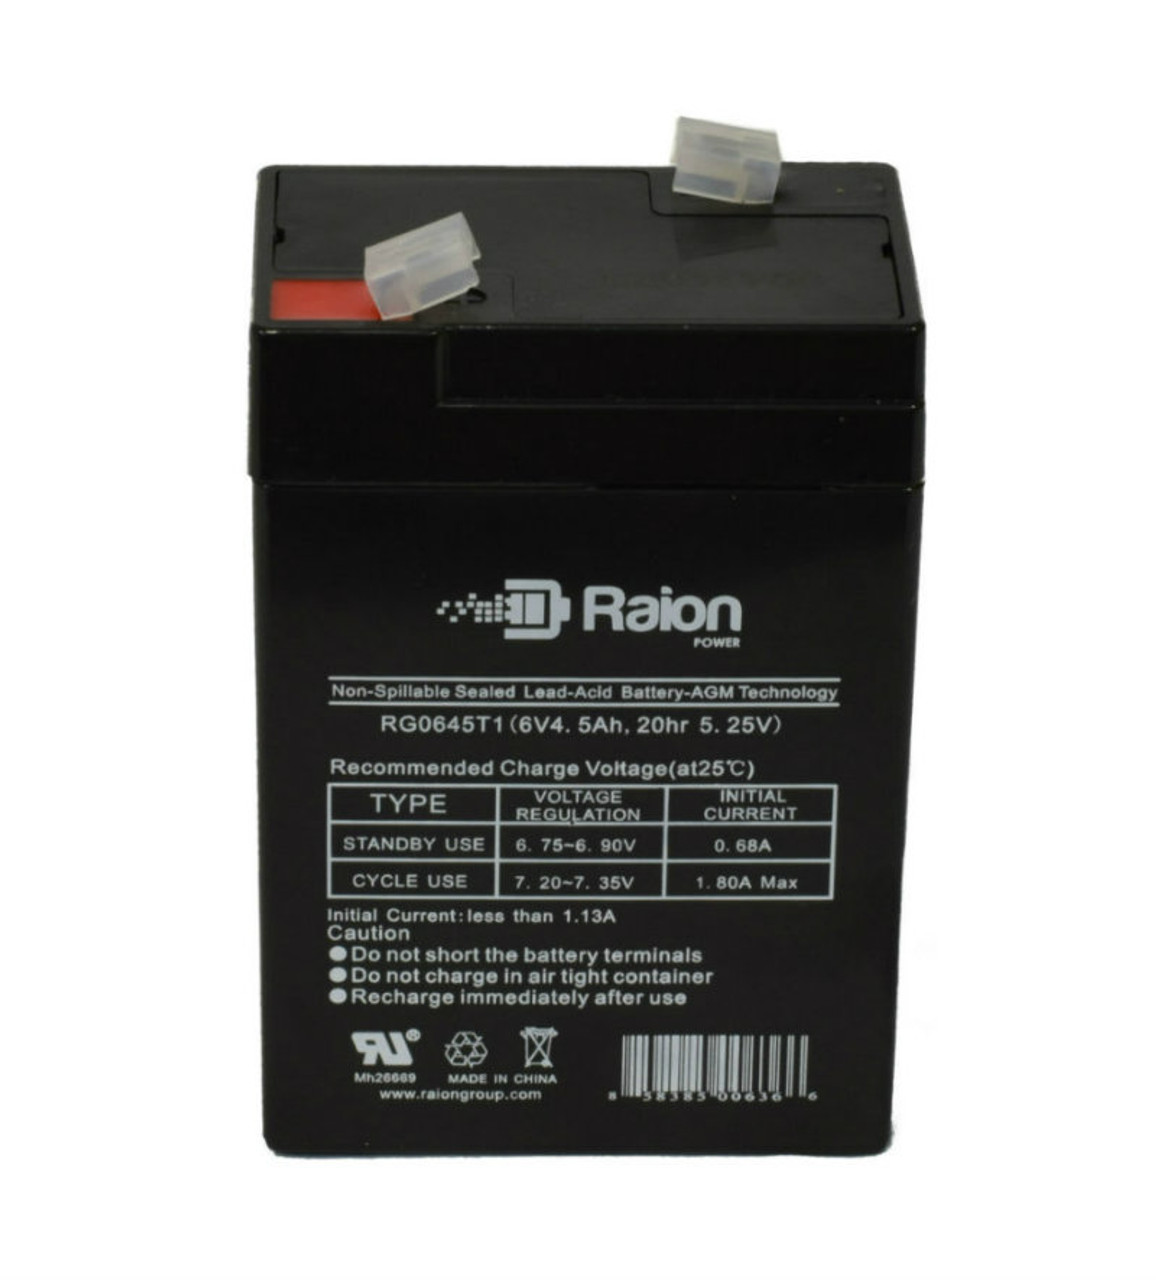 Raion Power RG0645T1 Replacement Battery Cartridge for National Power Corporation GS012P1